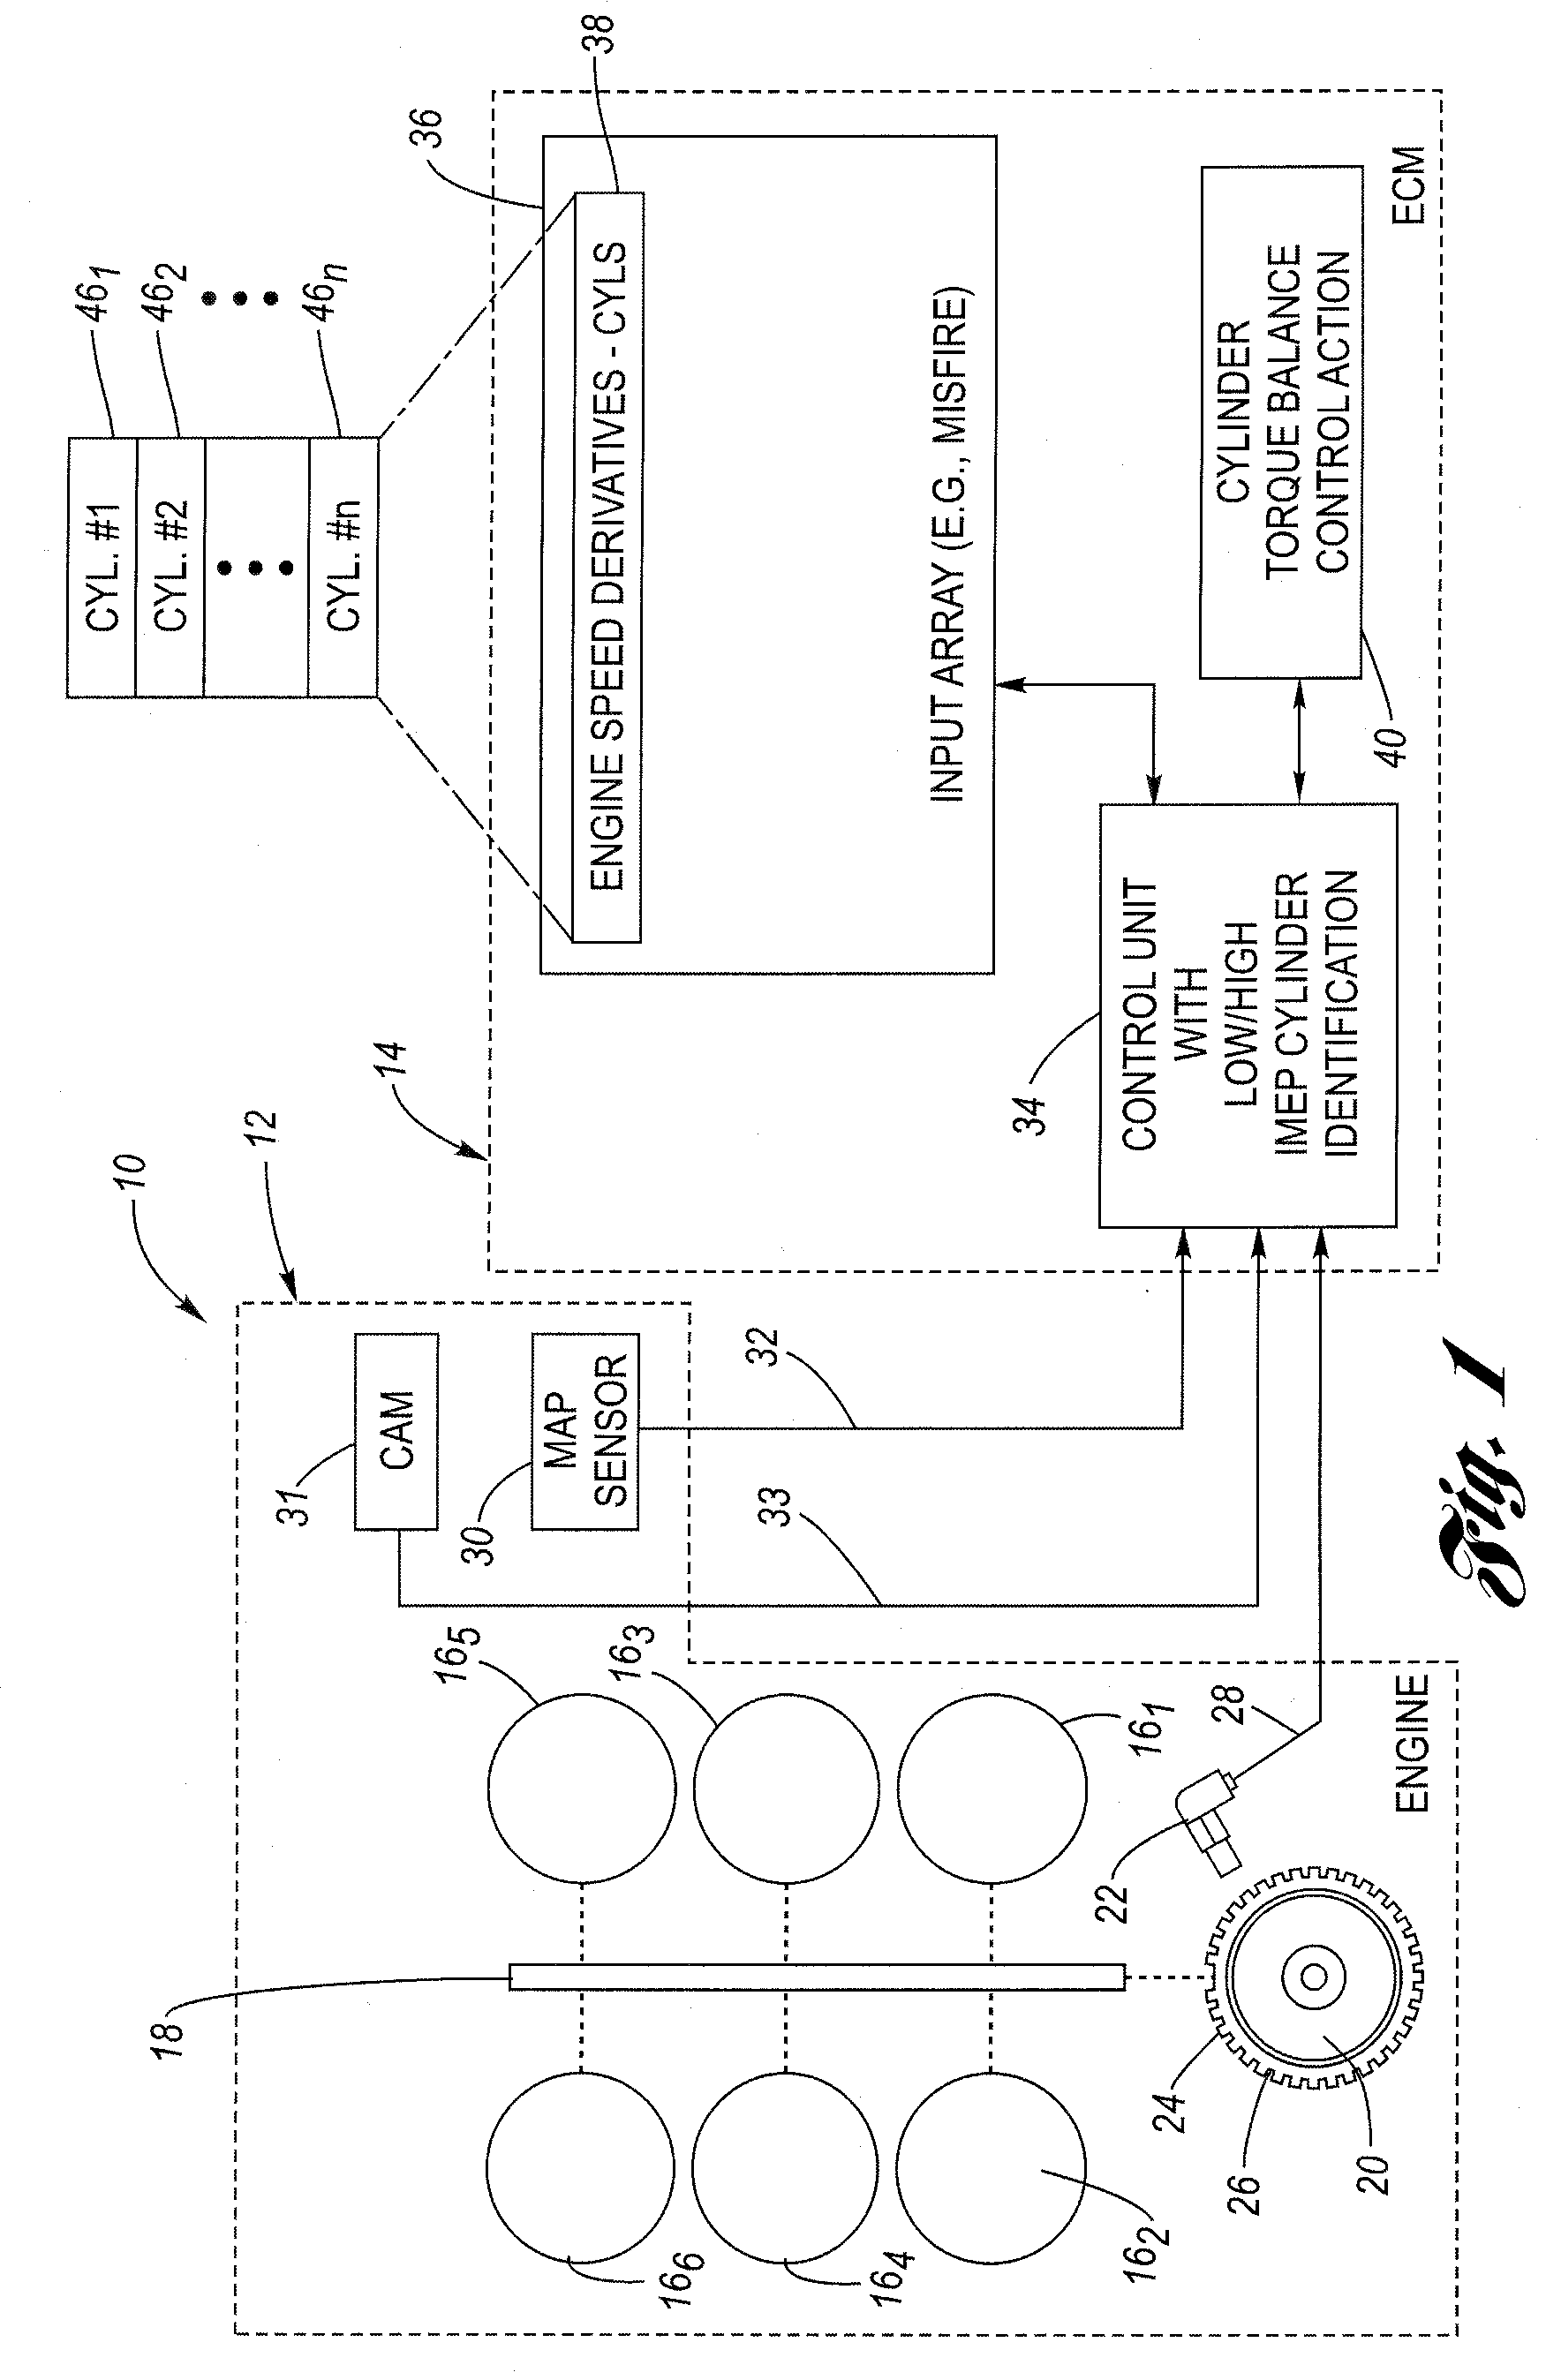 Method for low and high IMEP cylinder identification for cylinder balancing